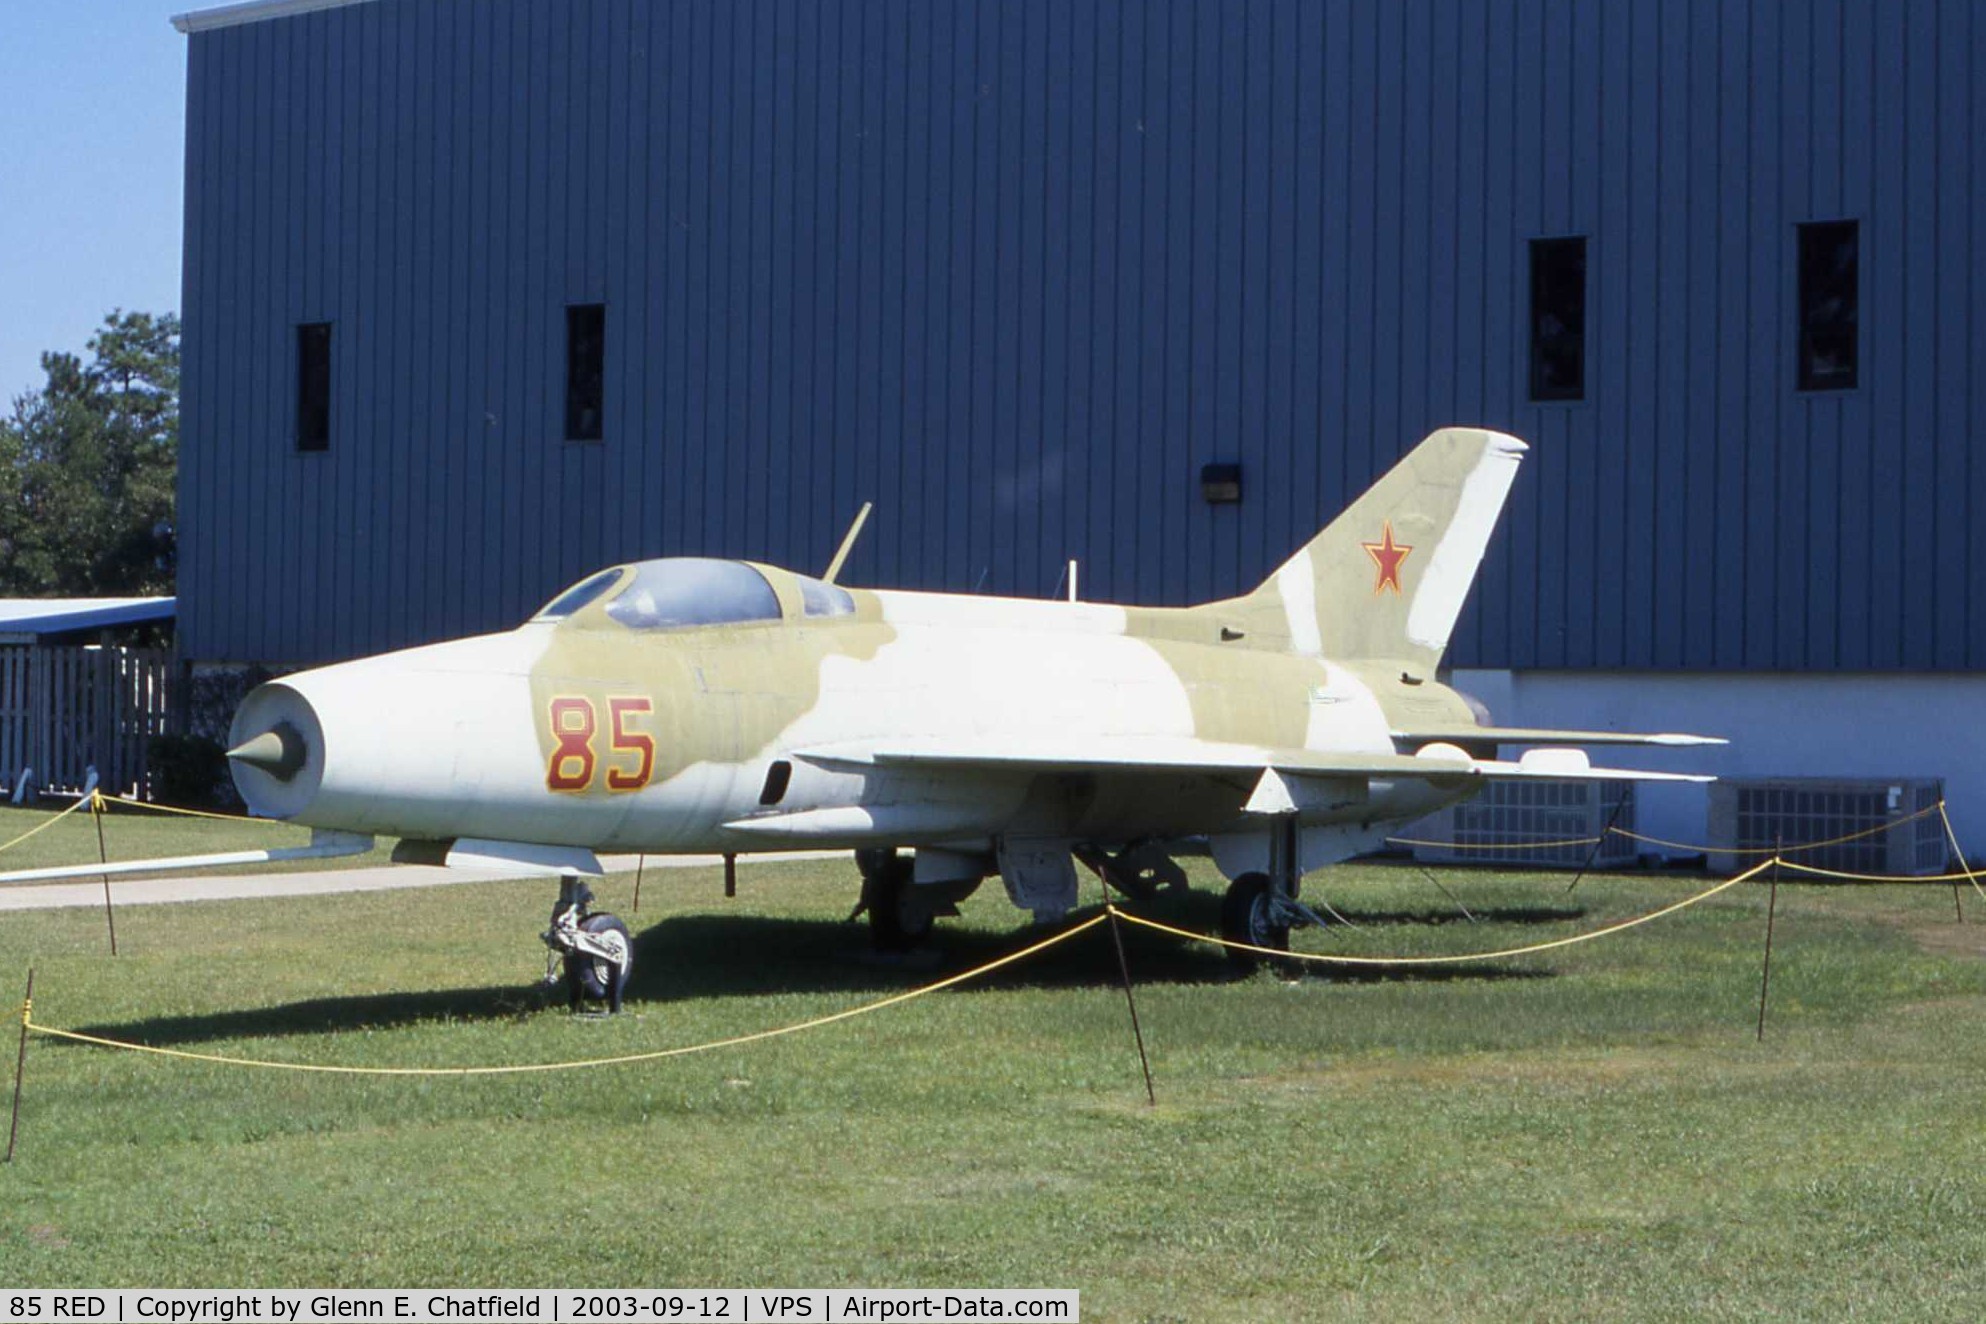 85 RED, Mikoyan-Gurevich MiG-21F-13 C/N Not found 21067, MiG-21 at the Air Force Armament Museum.  Ex-Indonesian bird